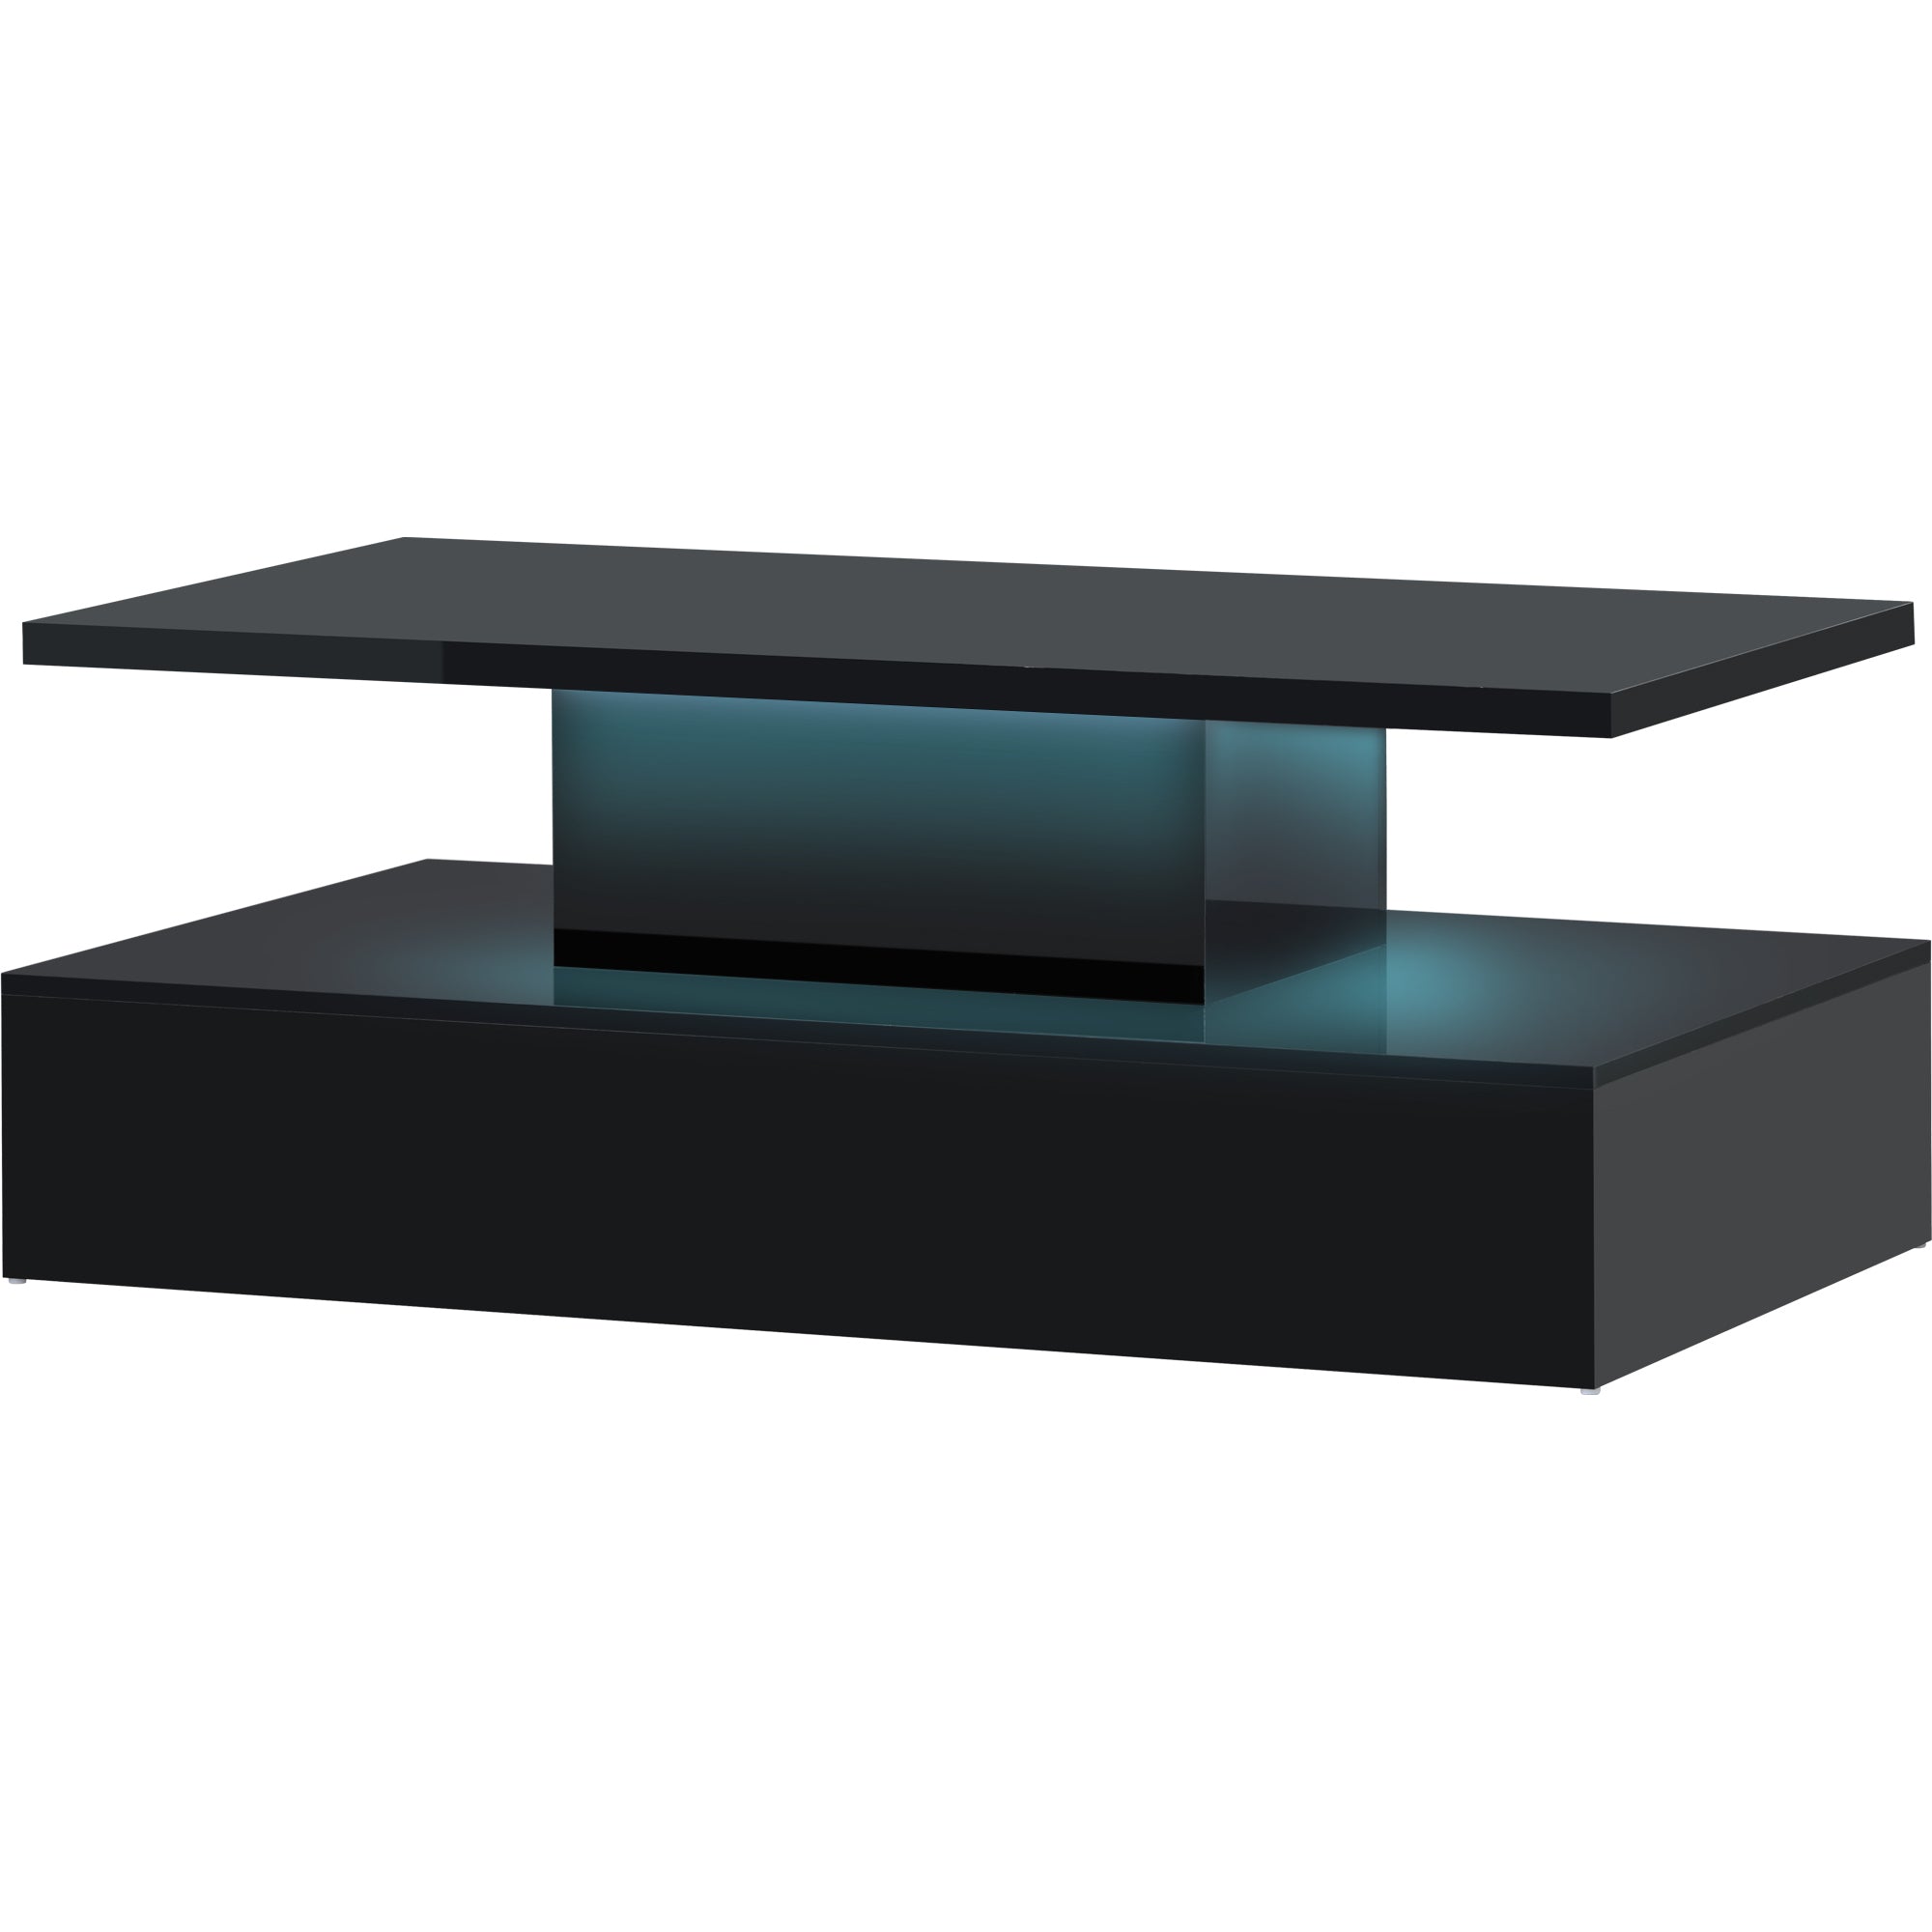 ON-TREND Coffee Table with LED Lighting (Black)